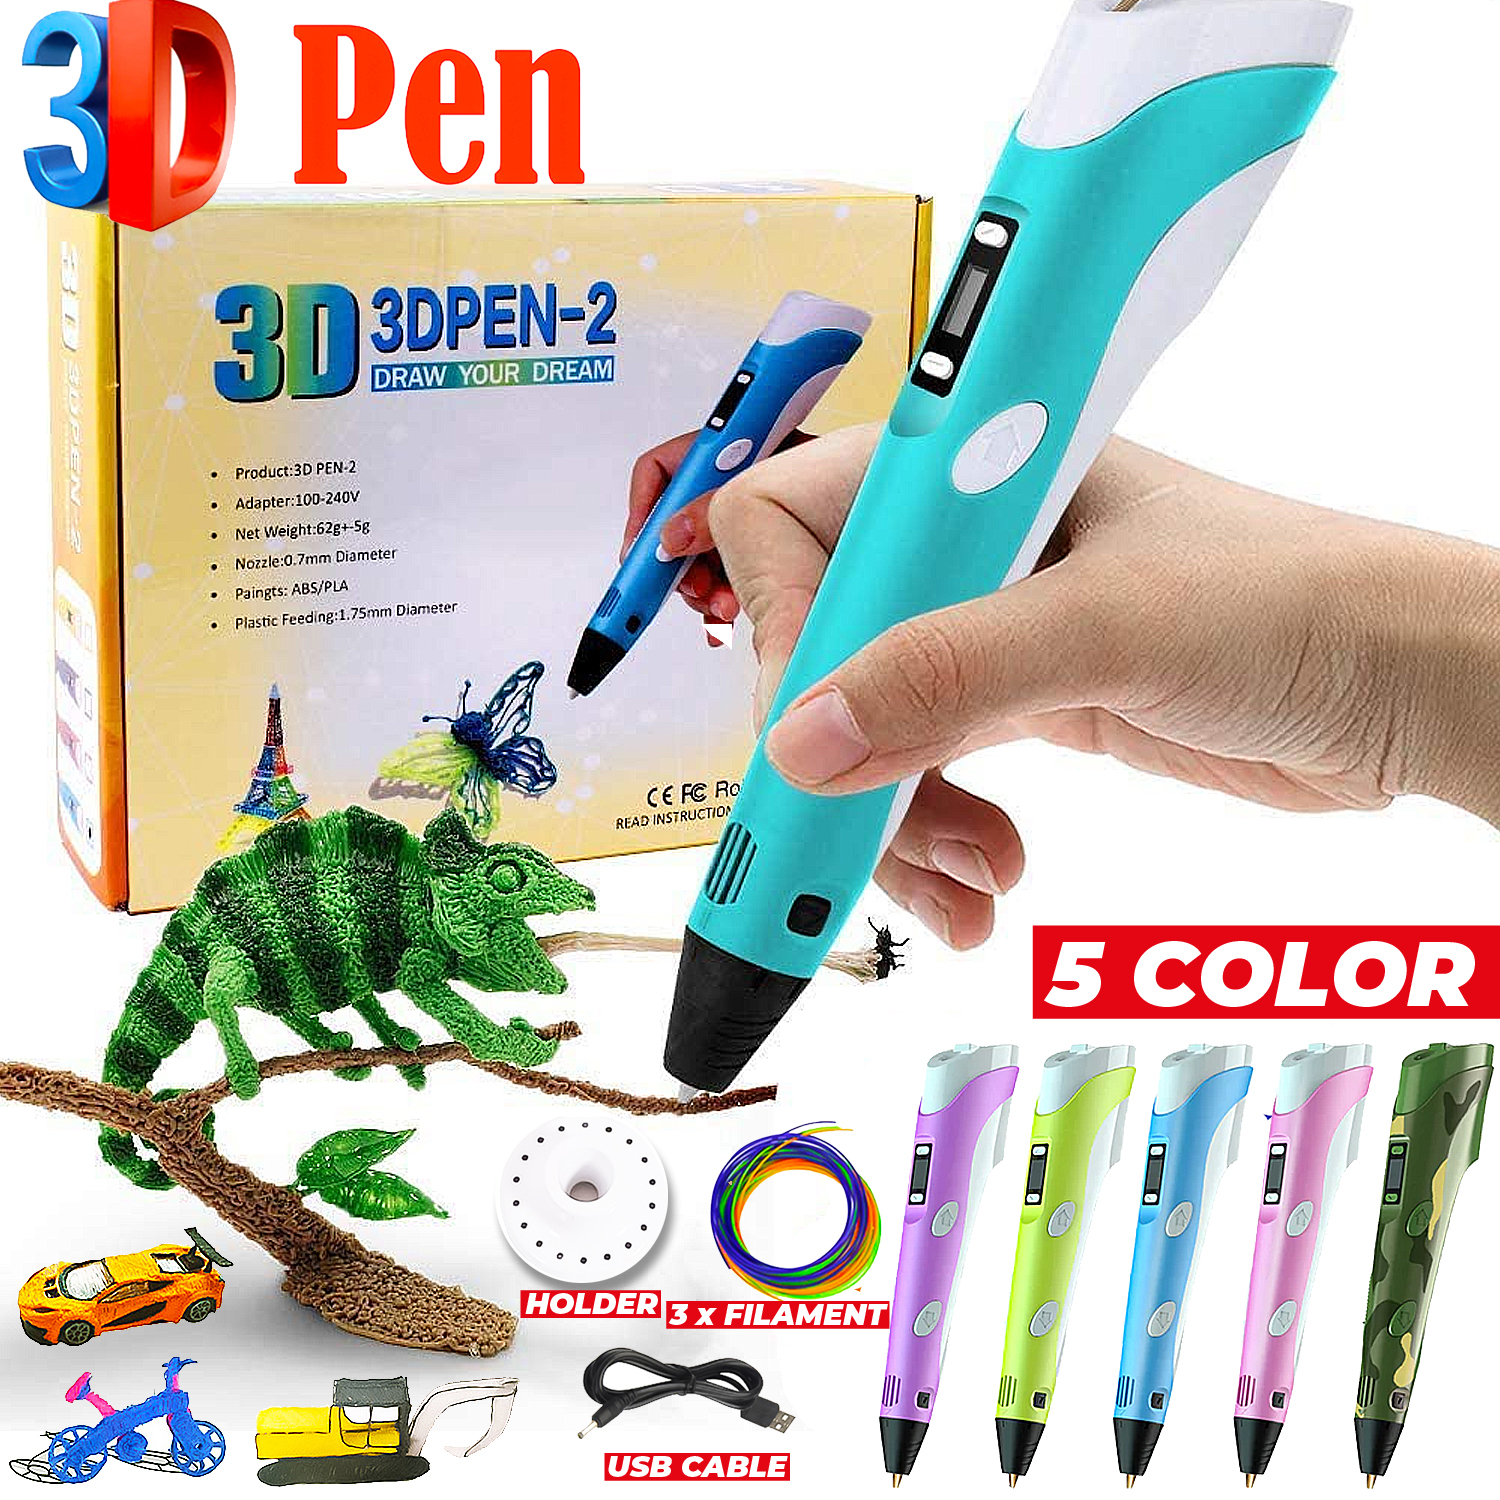 3D Pen with Adapter, 3D Pen for Kids